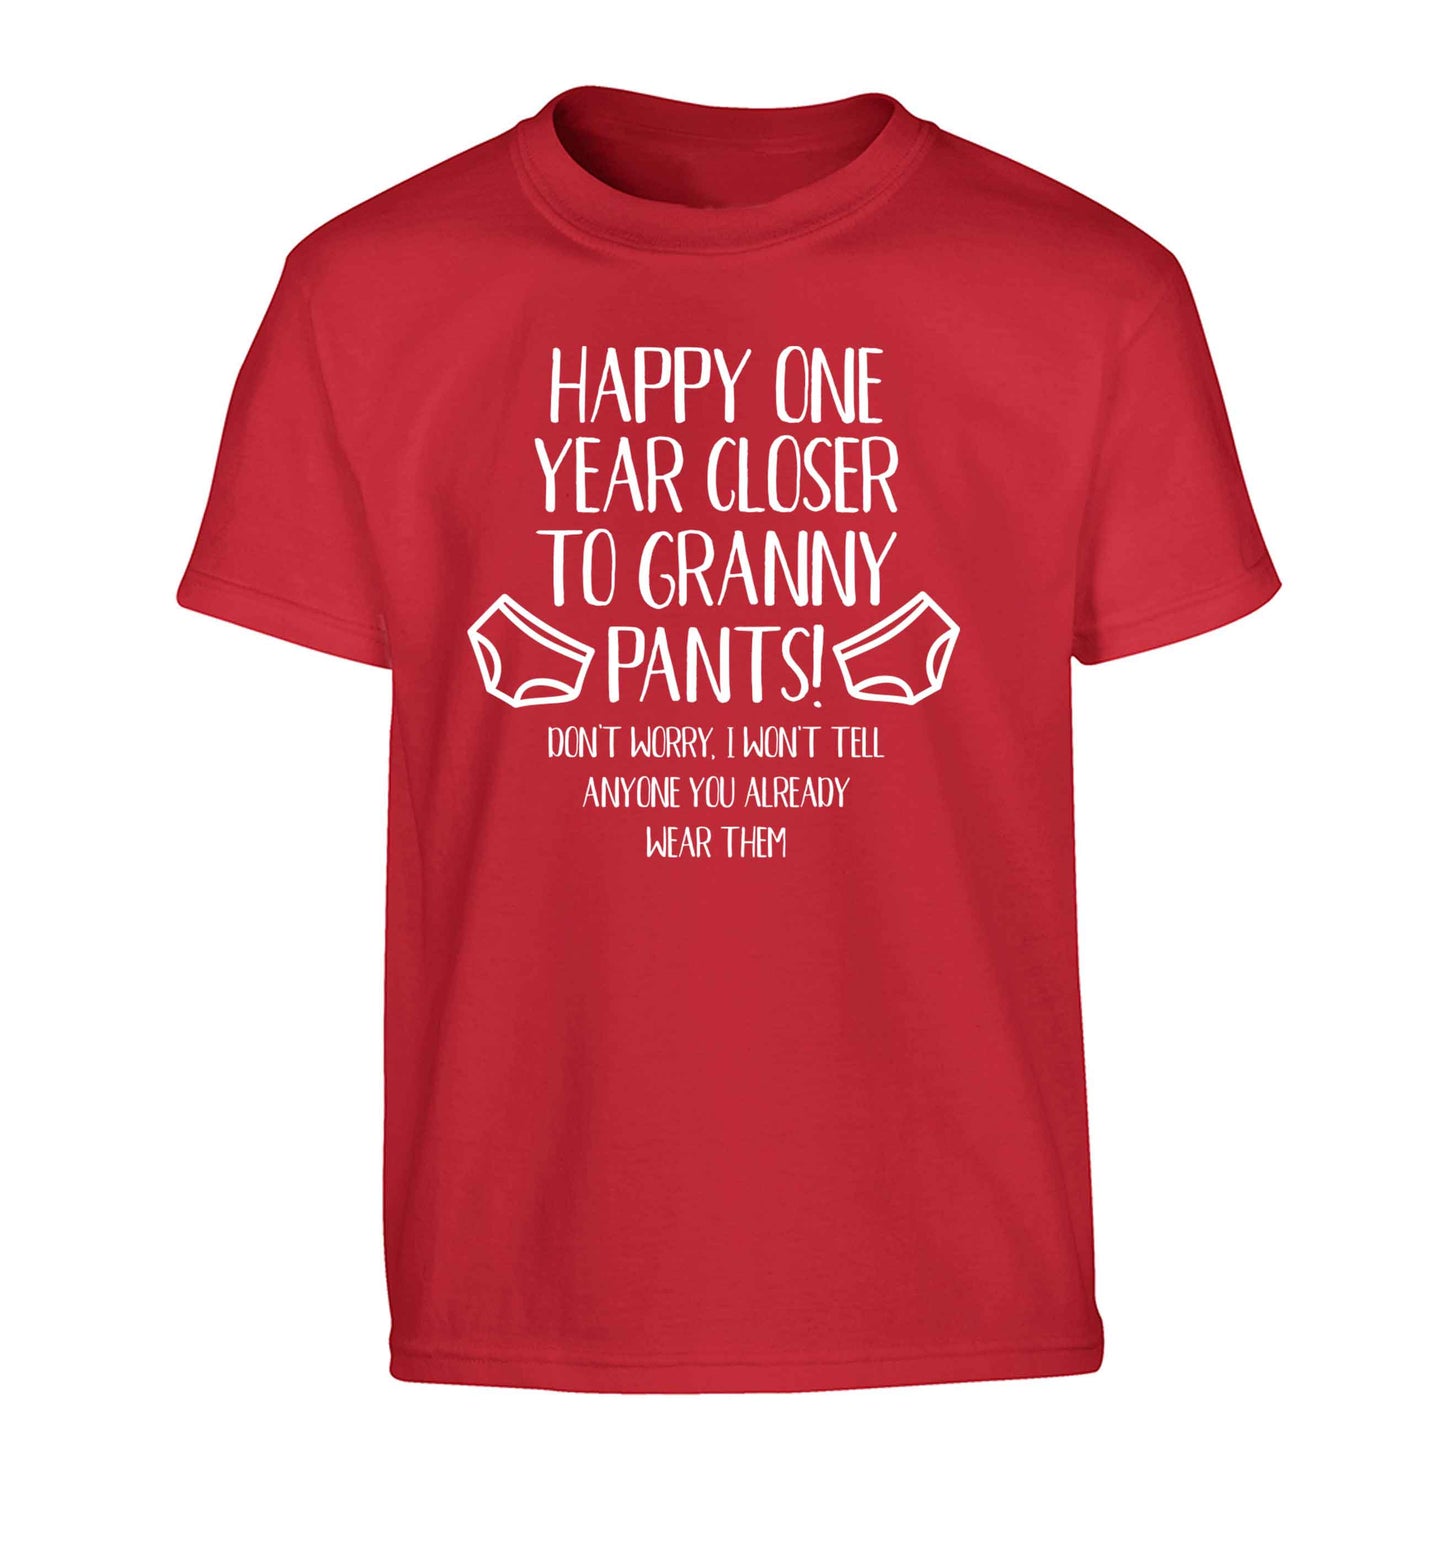 Happy one year closer to granny pants Children's red Tshirt 12-13 Years